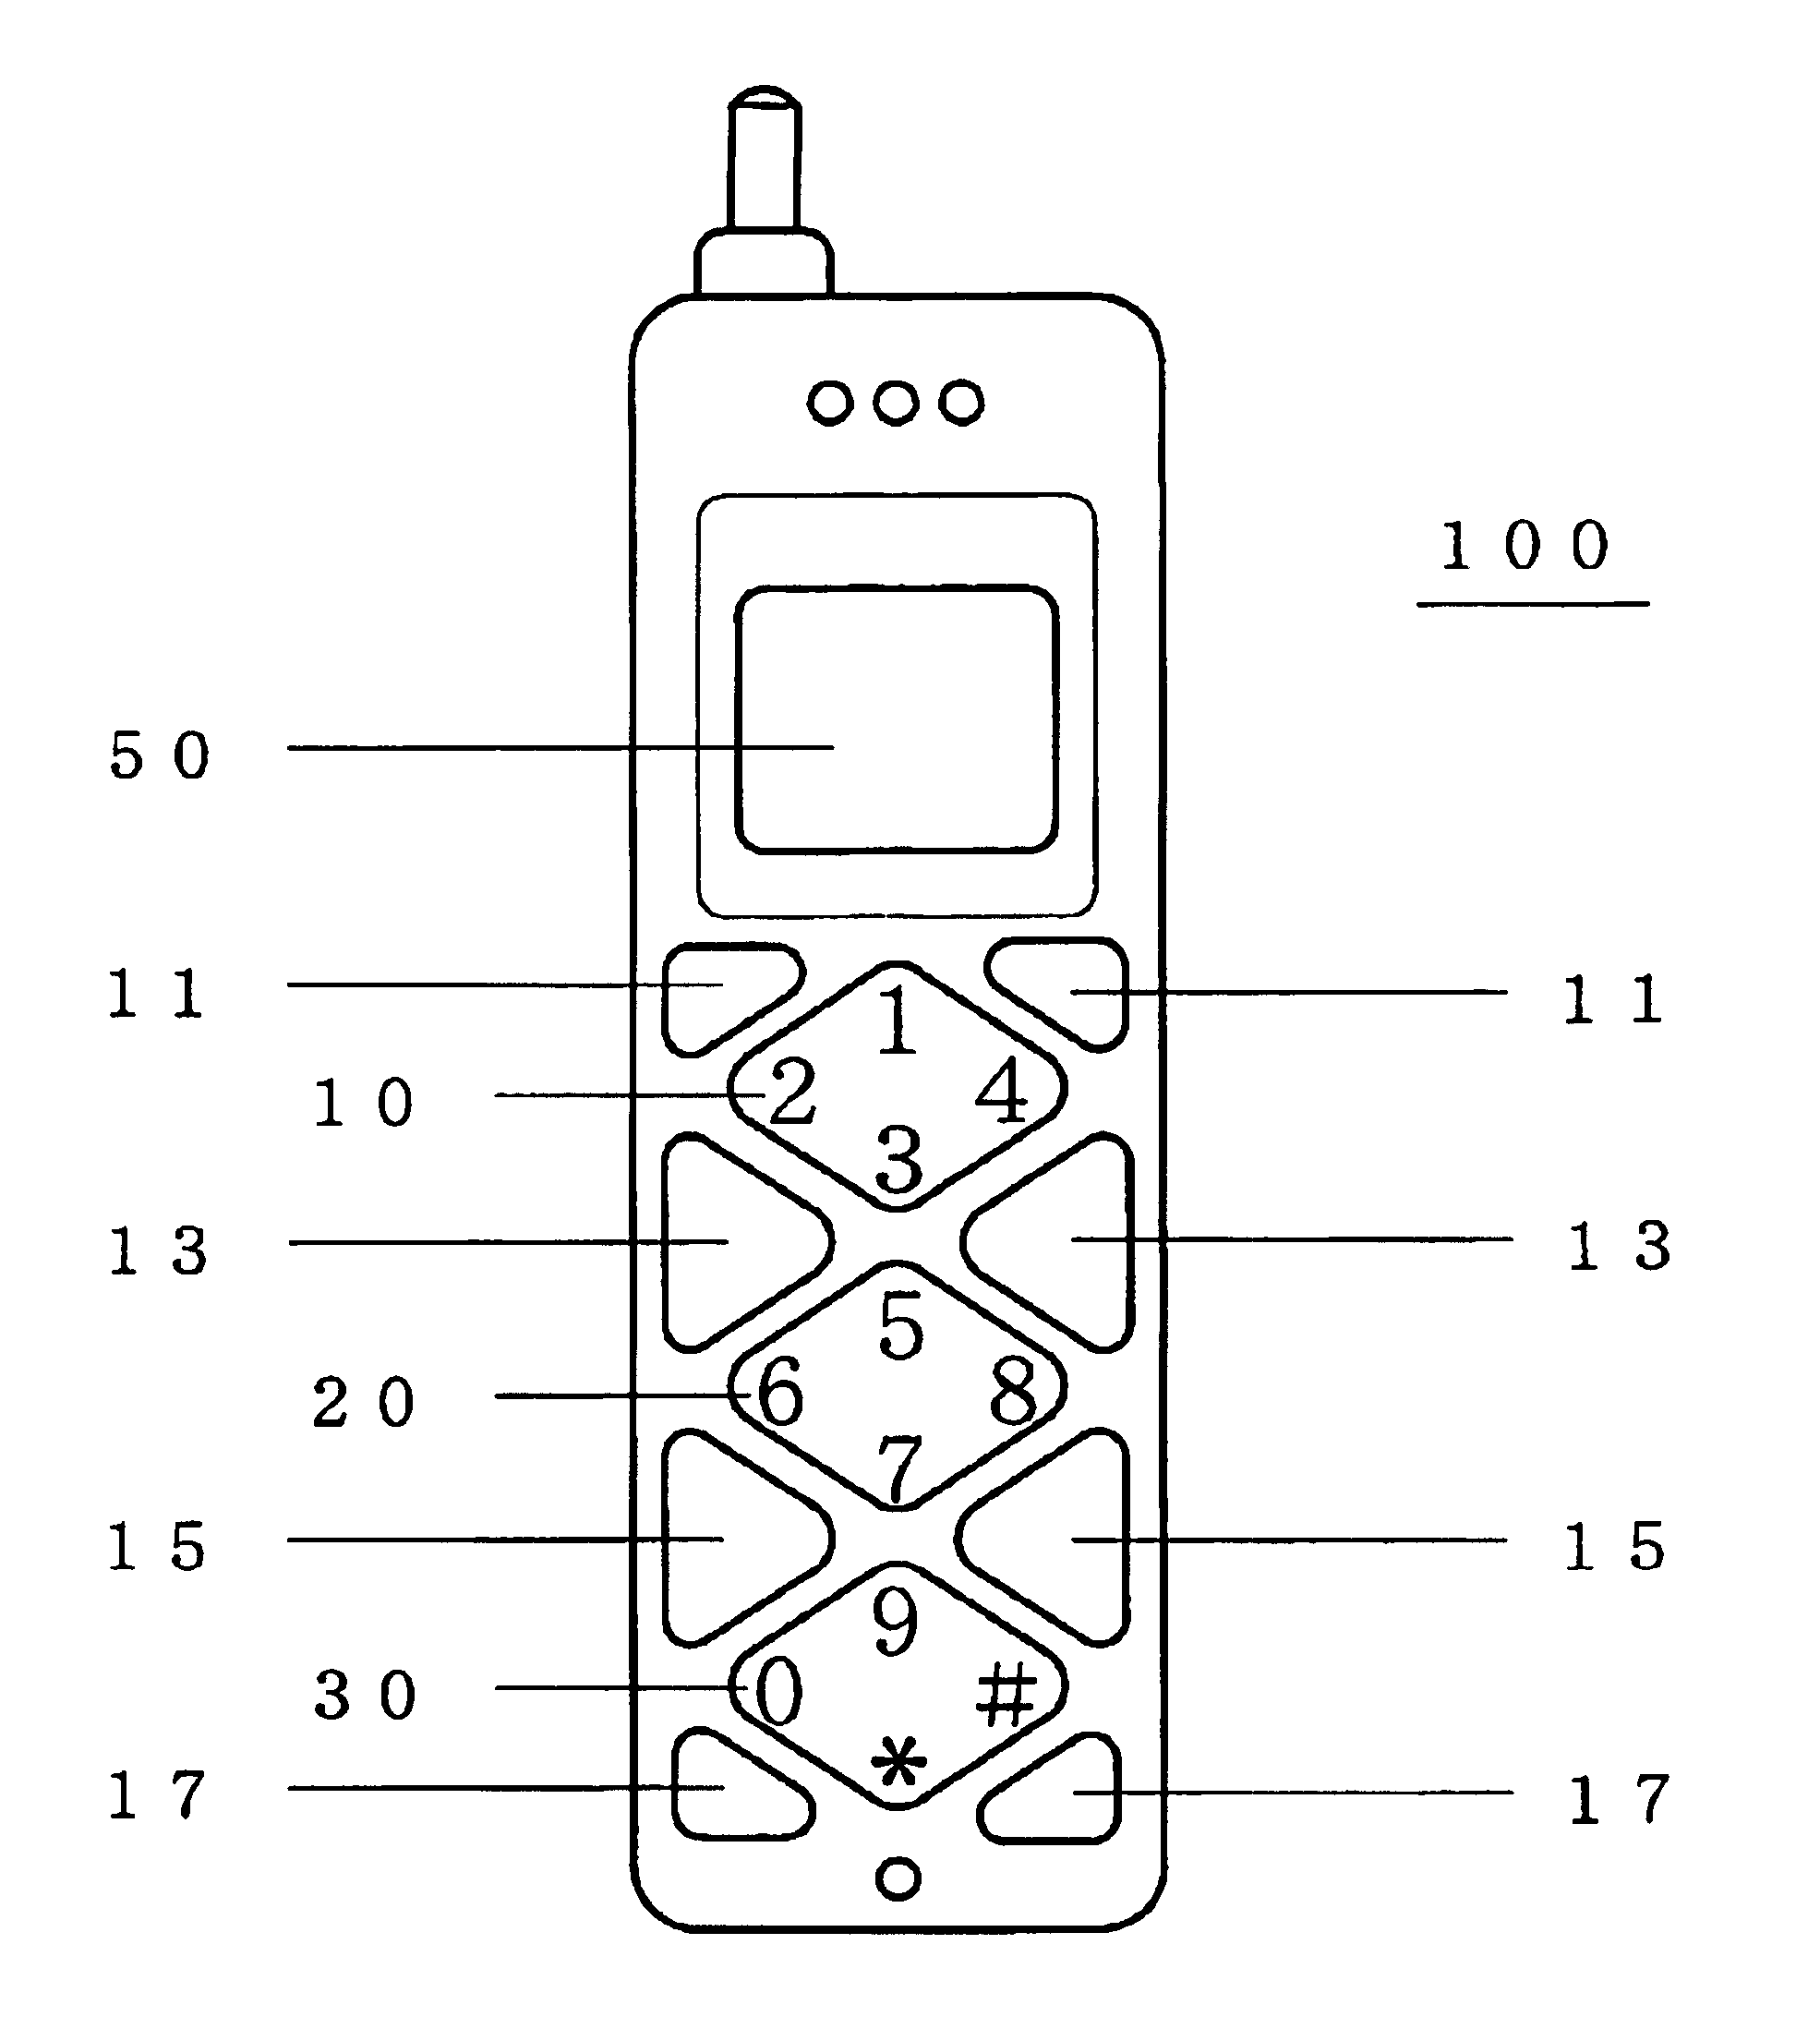 Operation panel of portable telephone